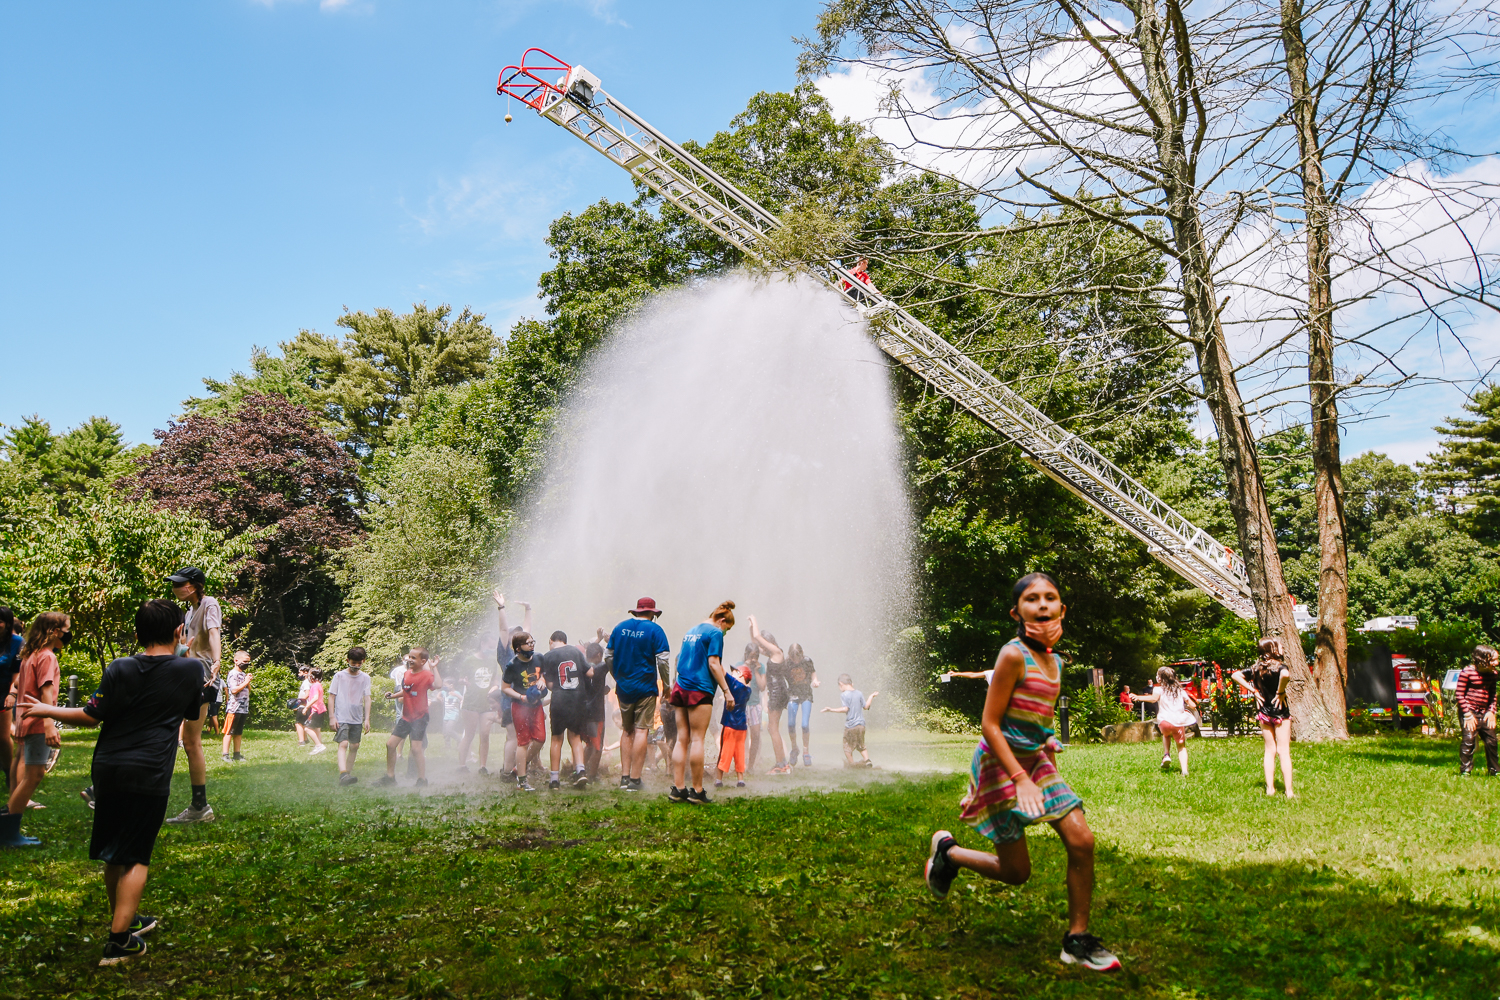 A firetruck with its ladder extended sprays a shower of water from its hose over a field full of campers on a hot day at Moose Hill Nature Camp